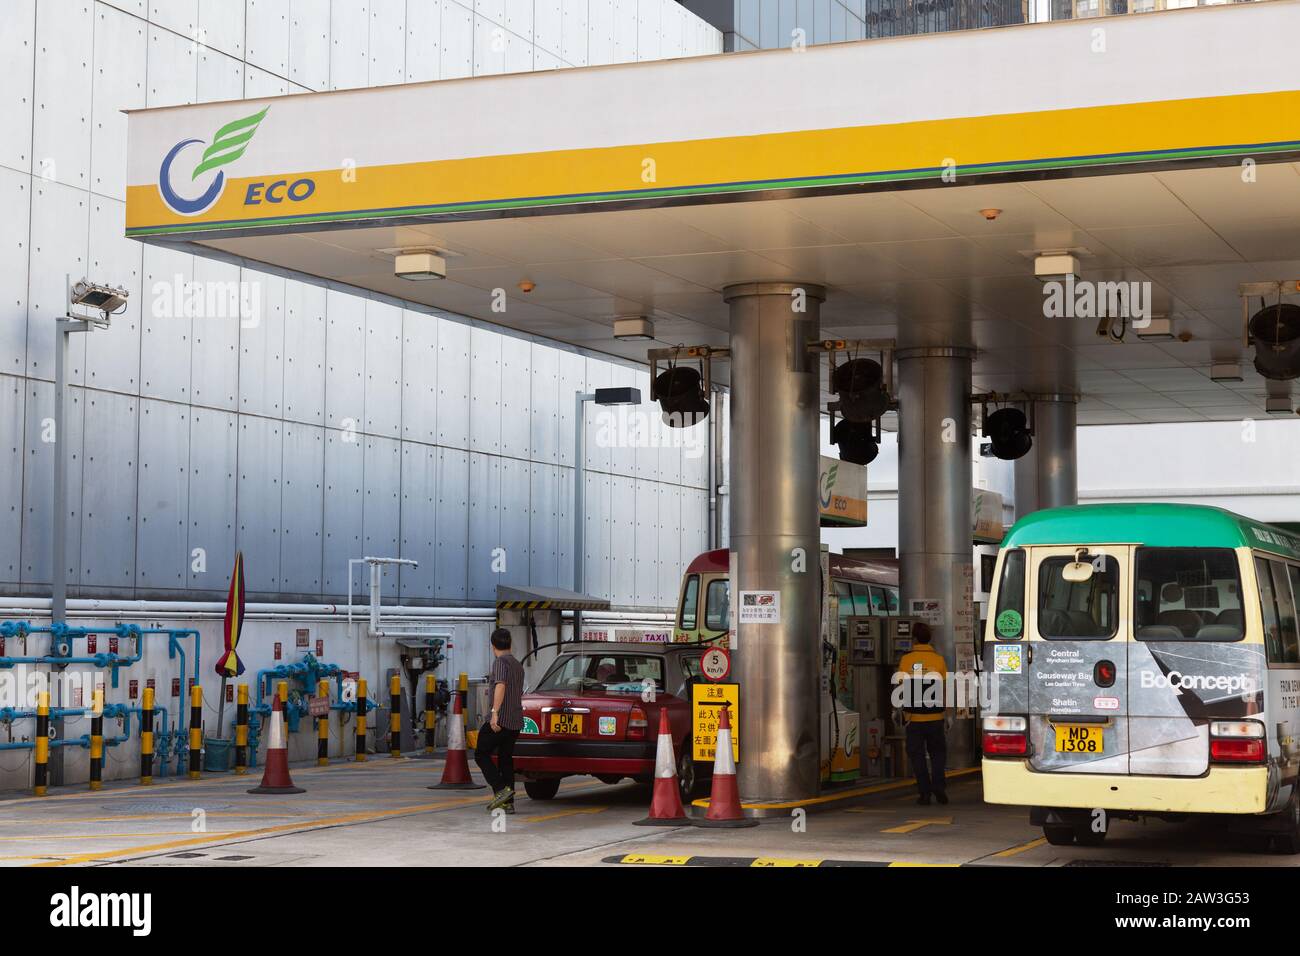 Eco LPG gas filling station, environmentally friendly vehicle fuel,with vehicles refuelling; Hong Kong Asia Stock Photo